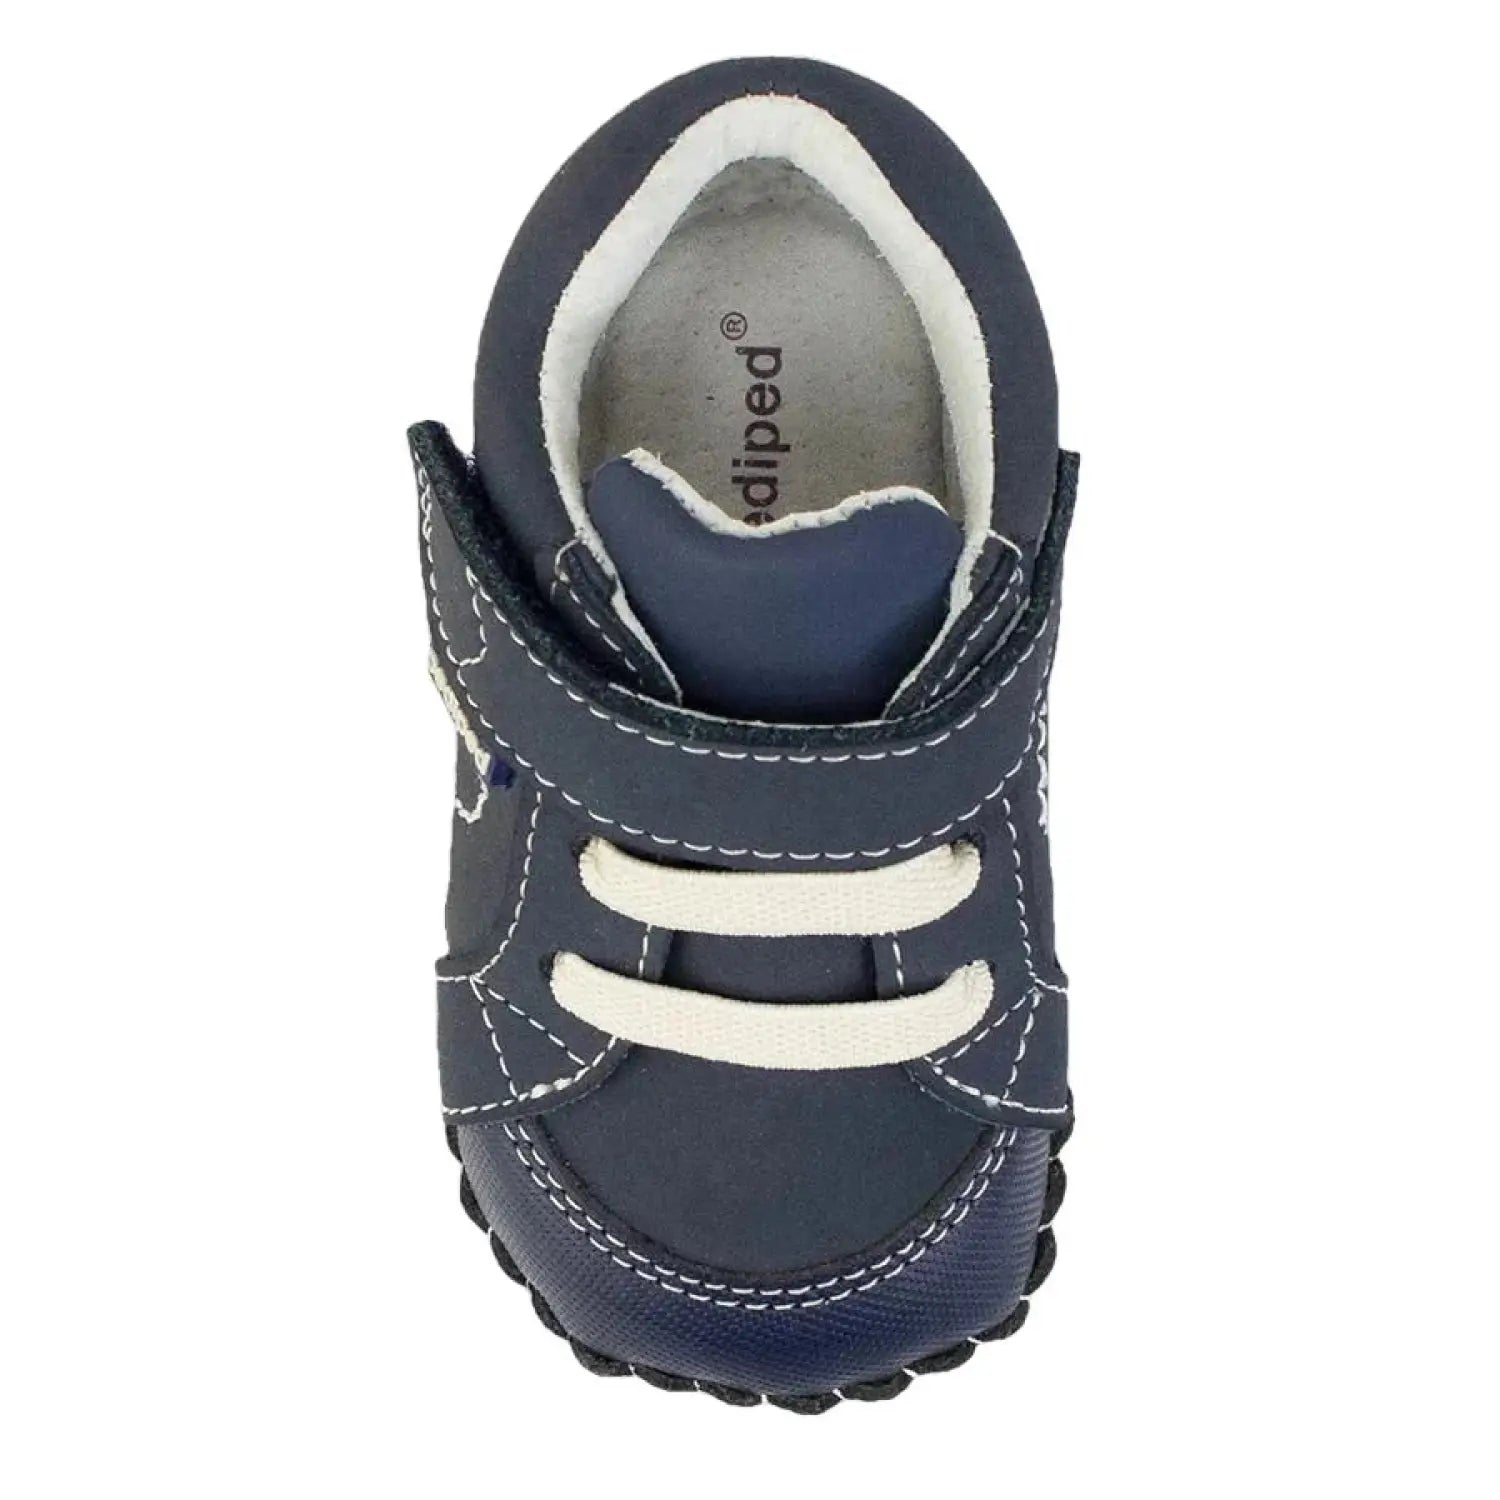 Pediped Originals® Dani Navy color, top view shown. Navy shoe with white laces.